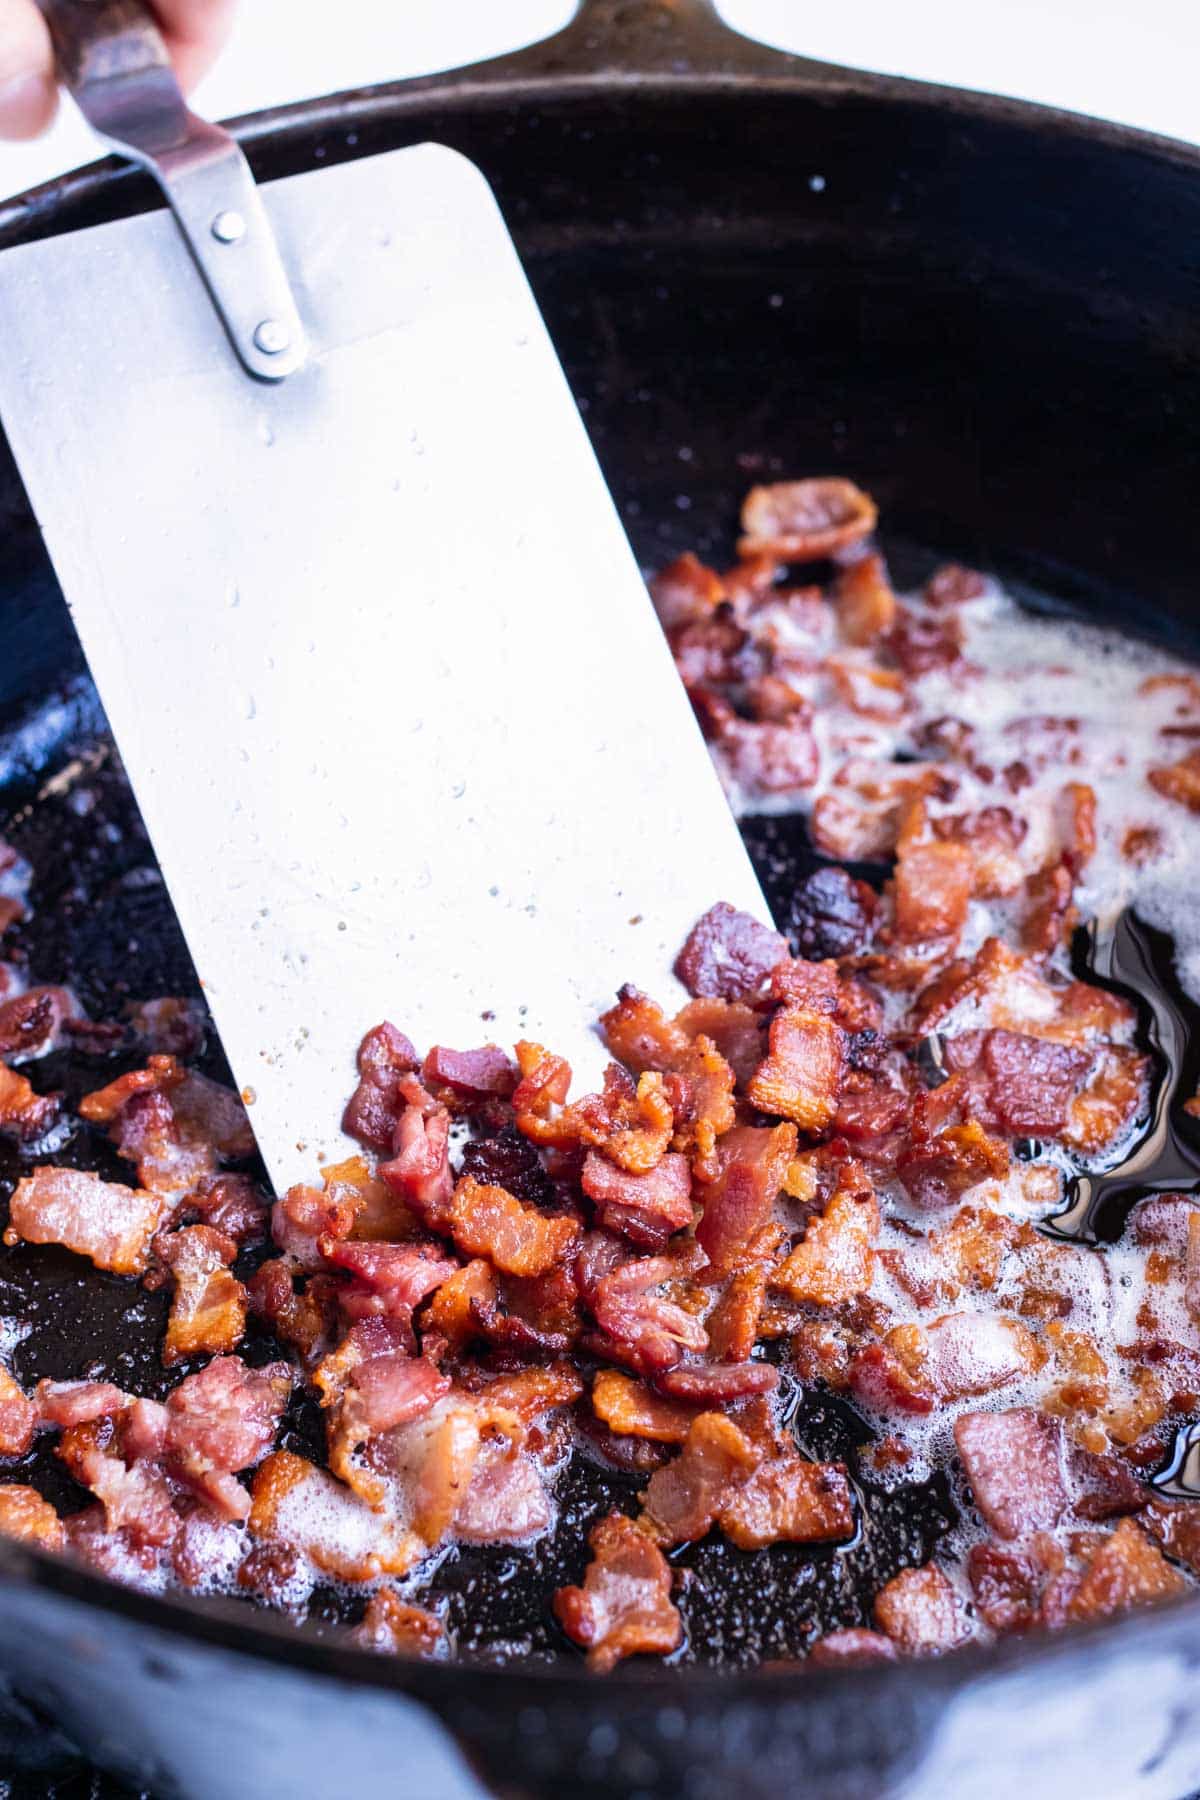 Bacon bits are cooked in a cast-iron skillet.